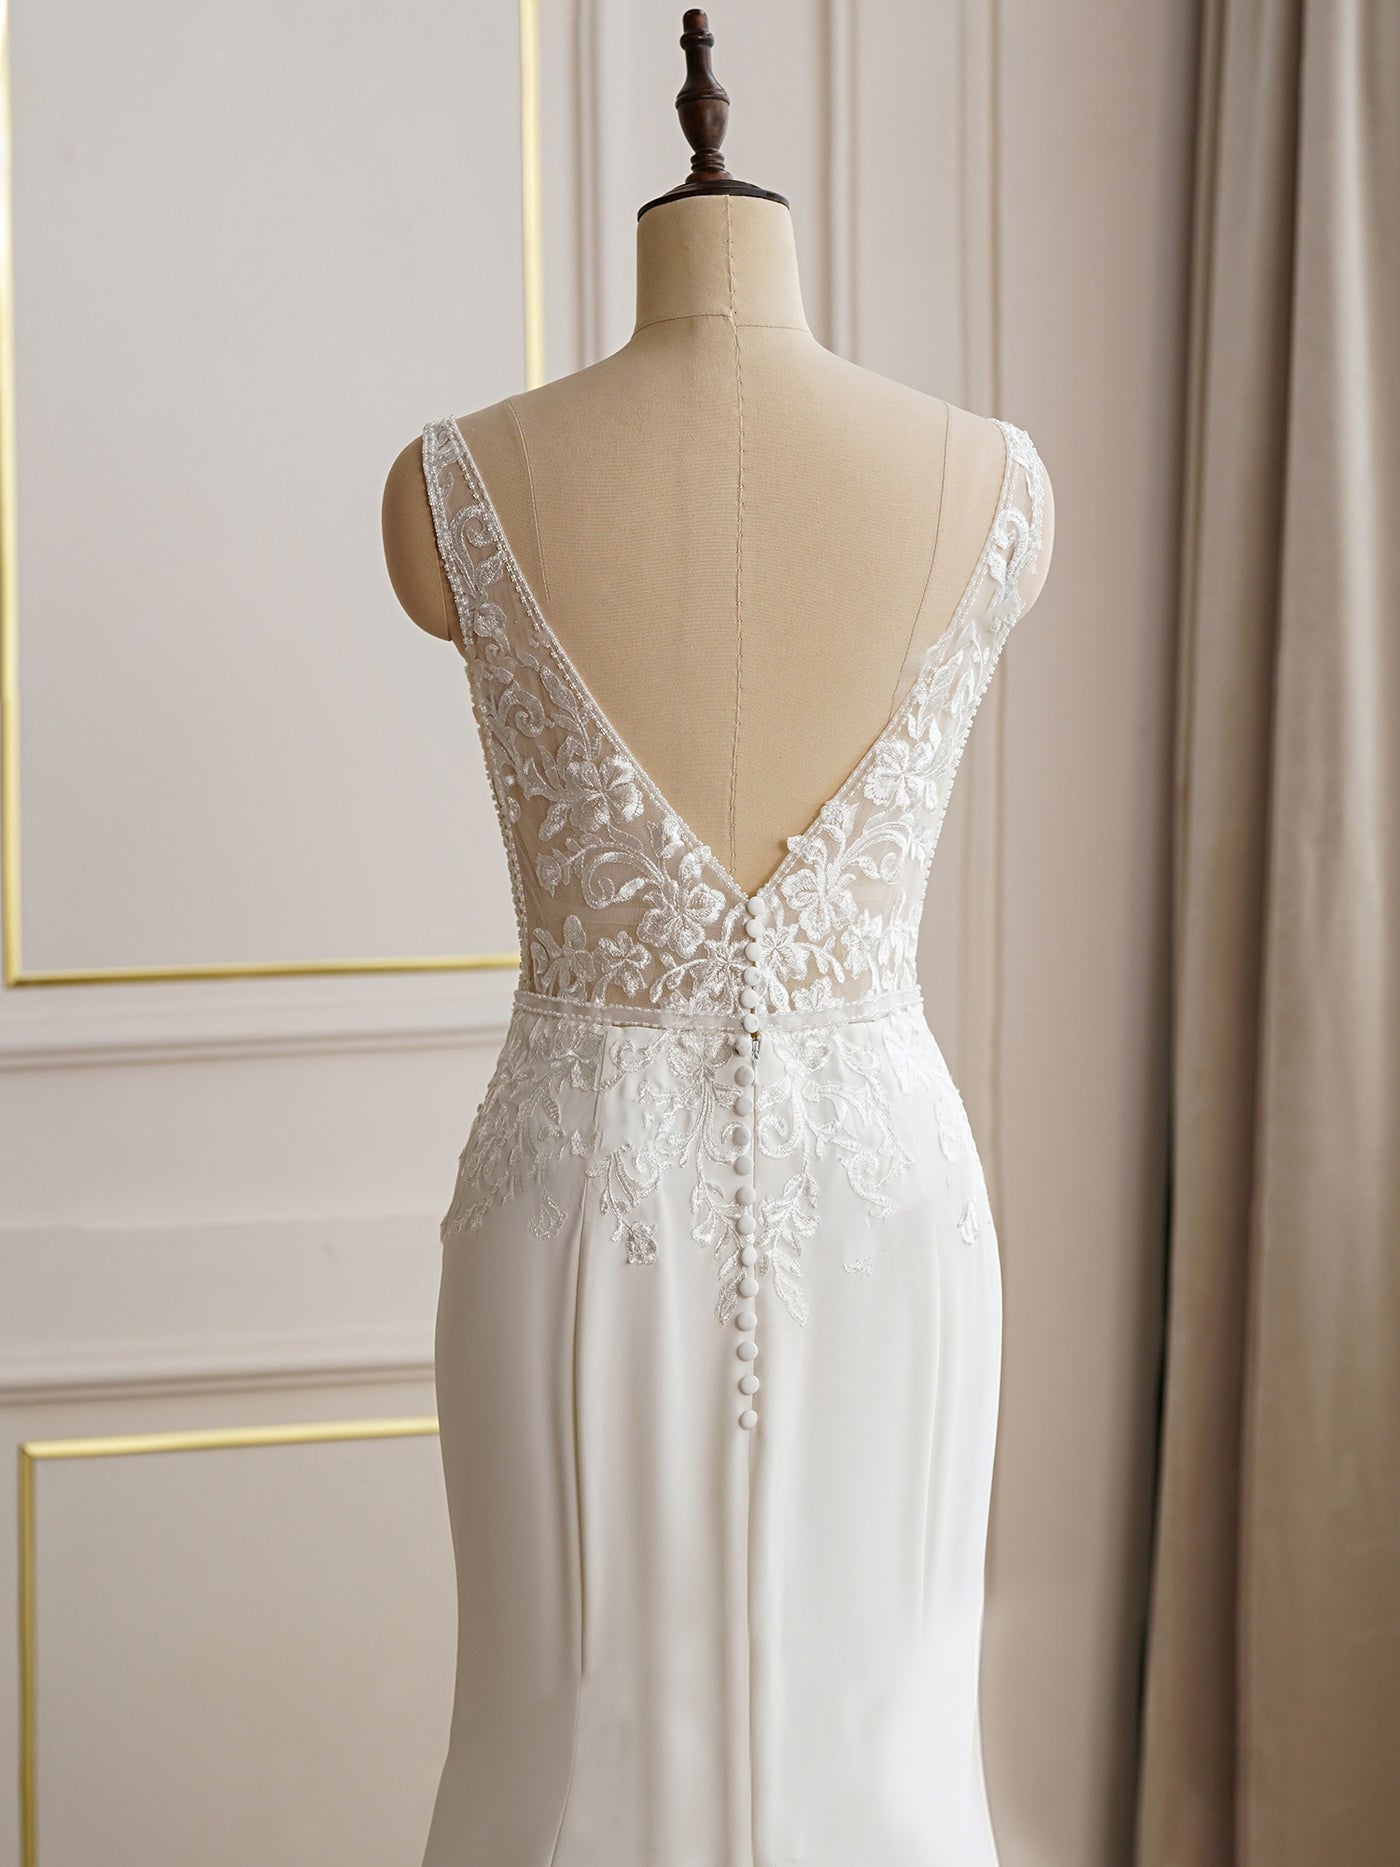 An elegant white wedding dress with lace detailing on a mannequin, featuring a deep v-back and intricate floral embroidery, available at Bergamot Bridal shops in London.